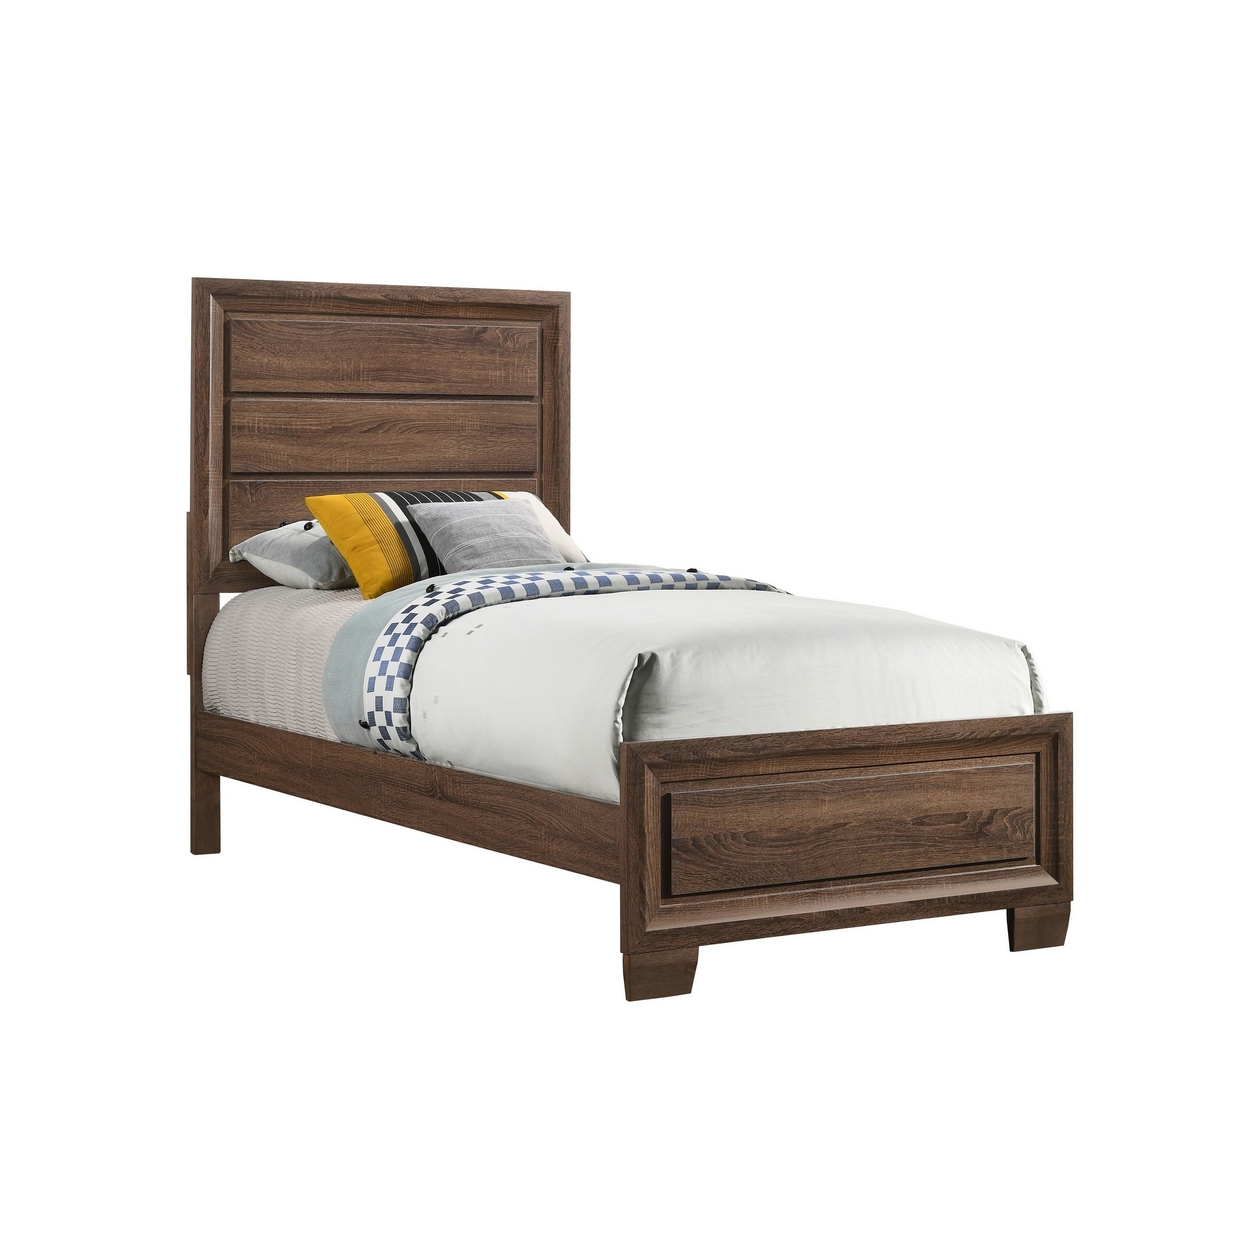 Amor Twin Size Bed, Modern Carved Panel Design, Tapered Legs, Brown- Saltoro Sherpi